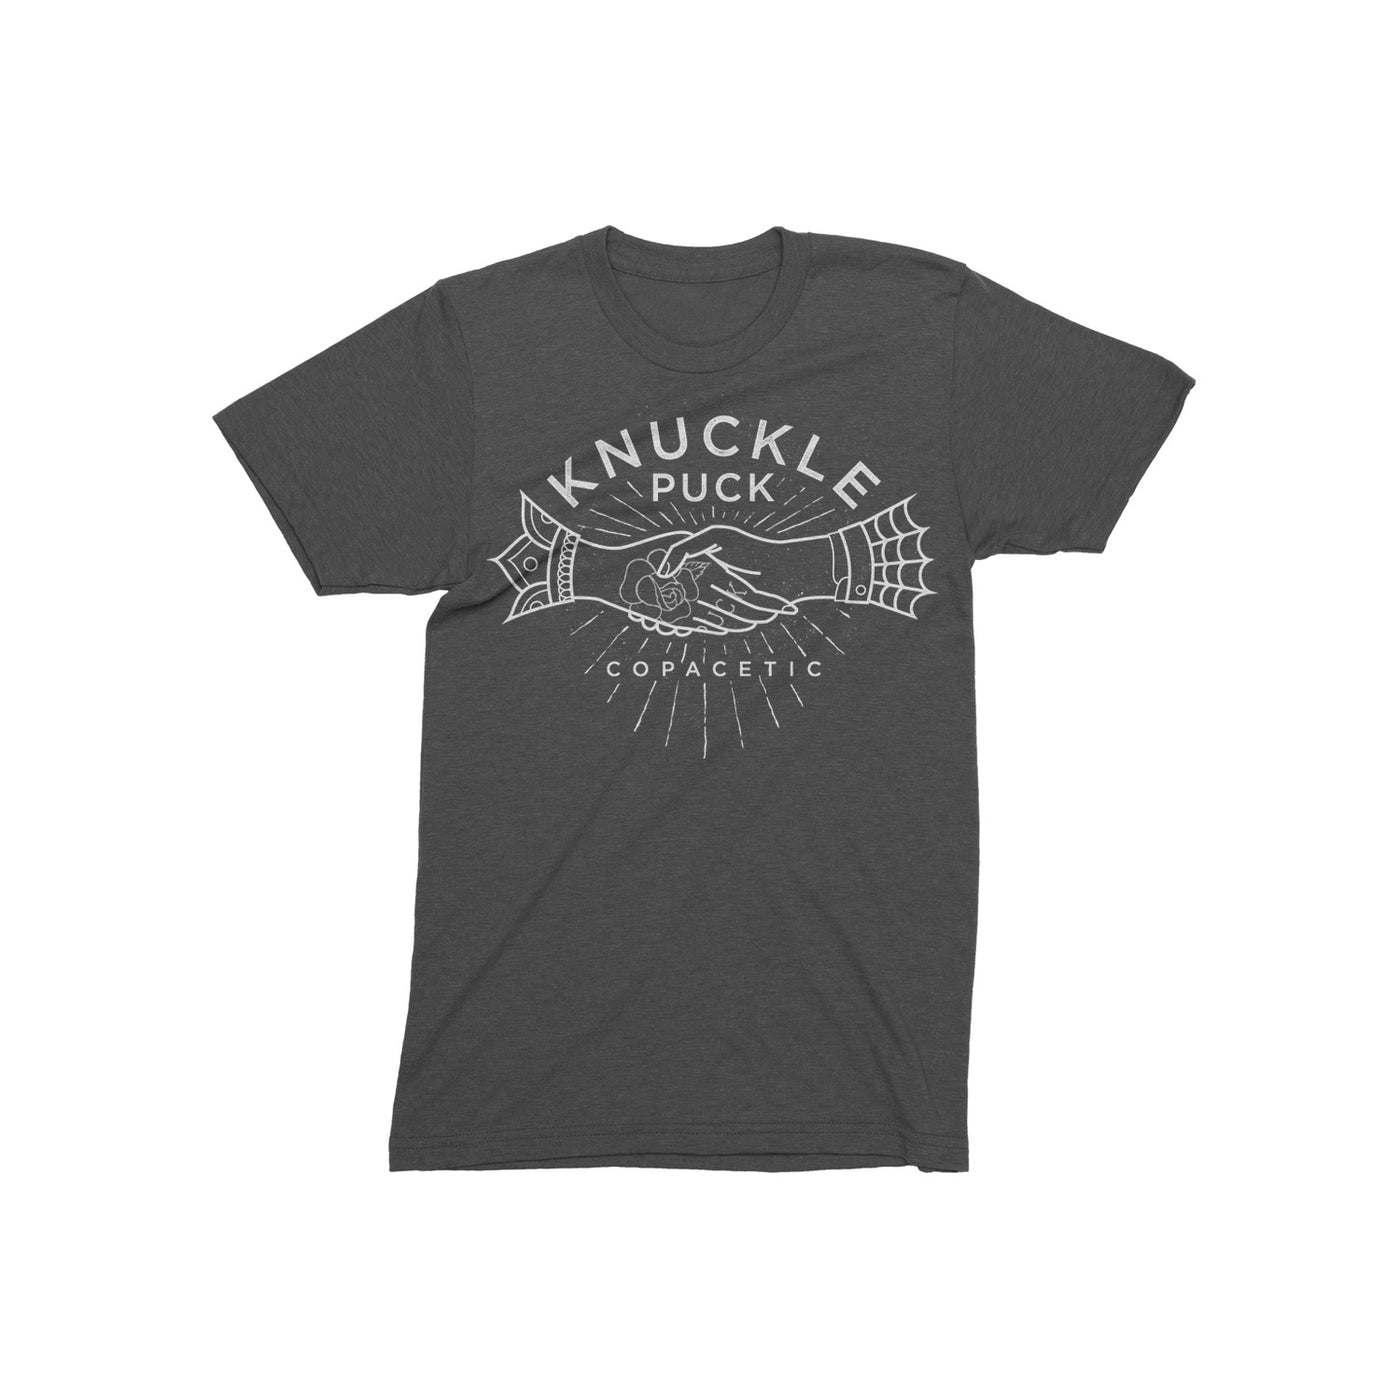 Hands Charcoal Heather Grey T-Shirt